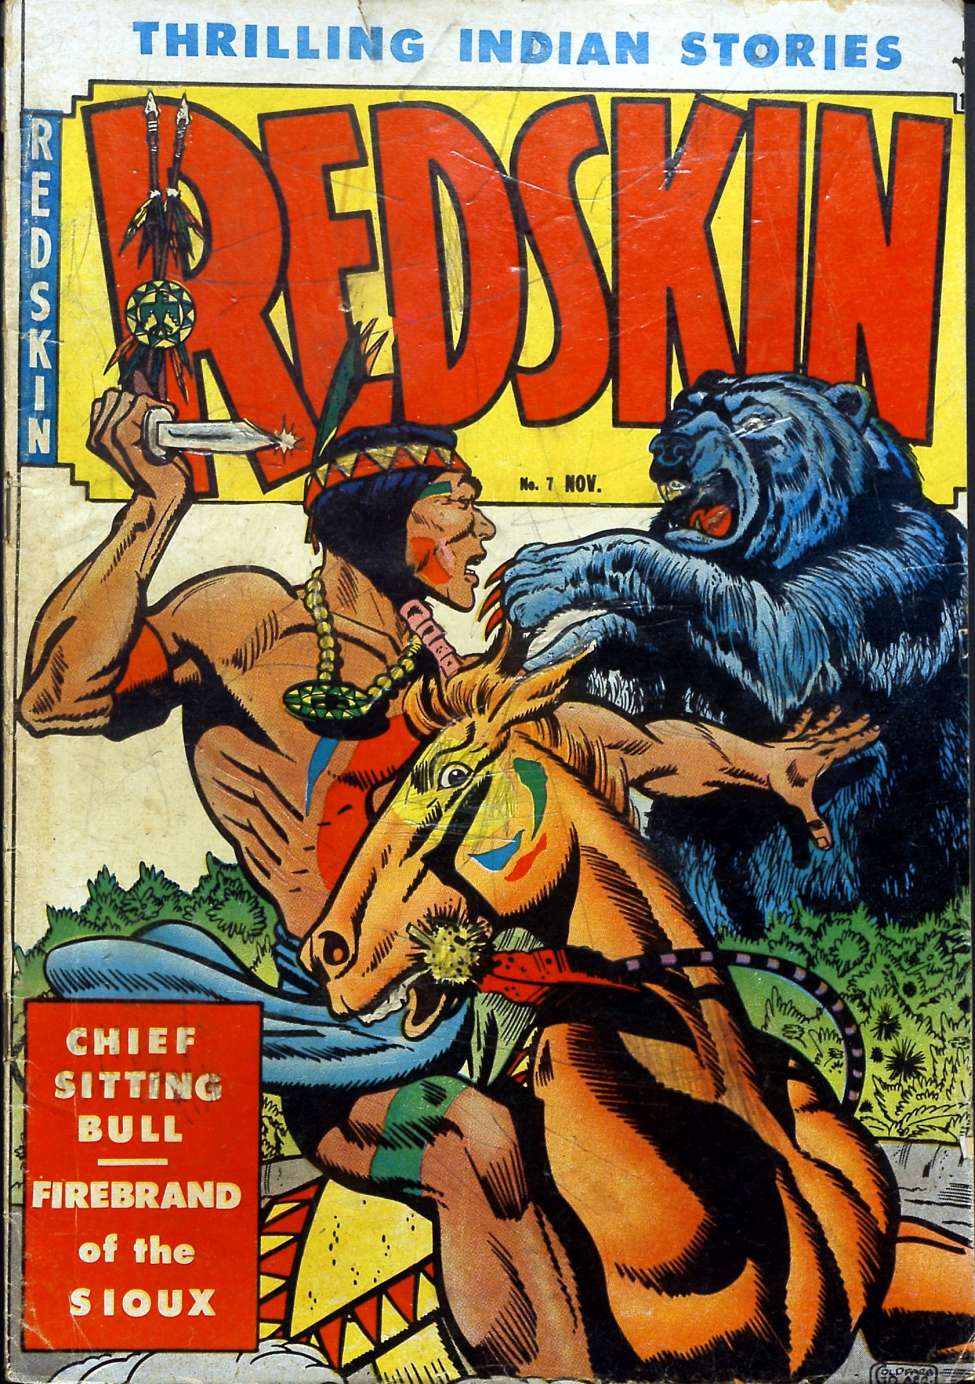 Book Cover For Redskin 7